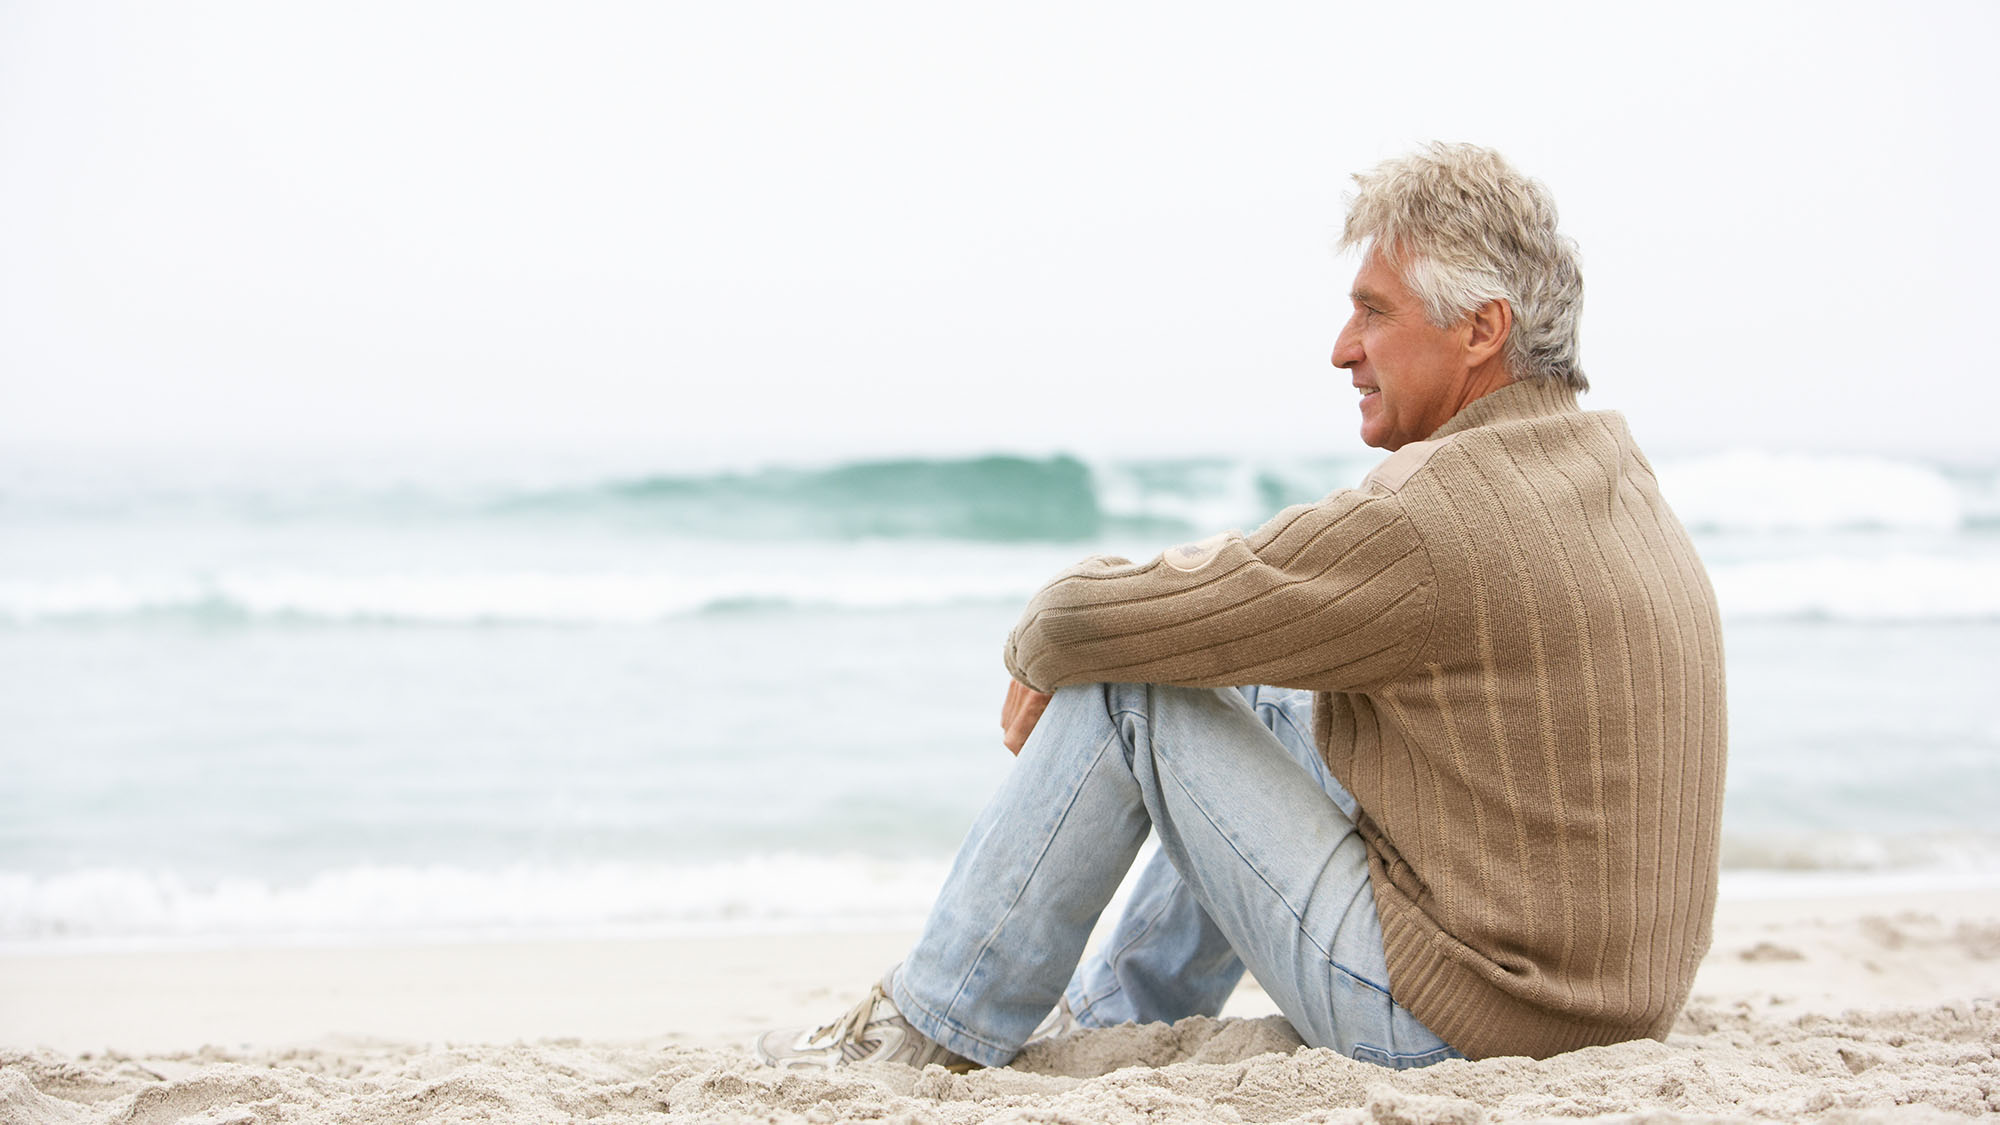 Man sitting on a beach viewing the calm waters